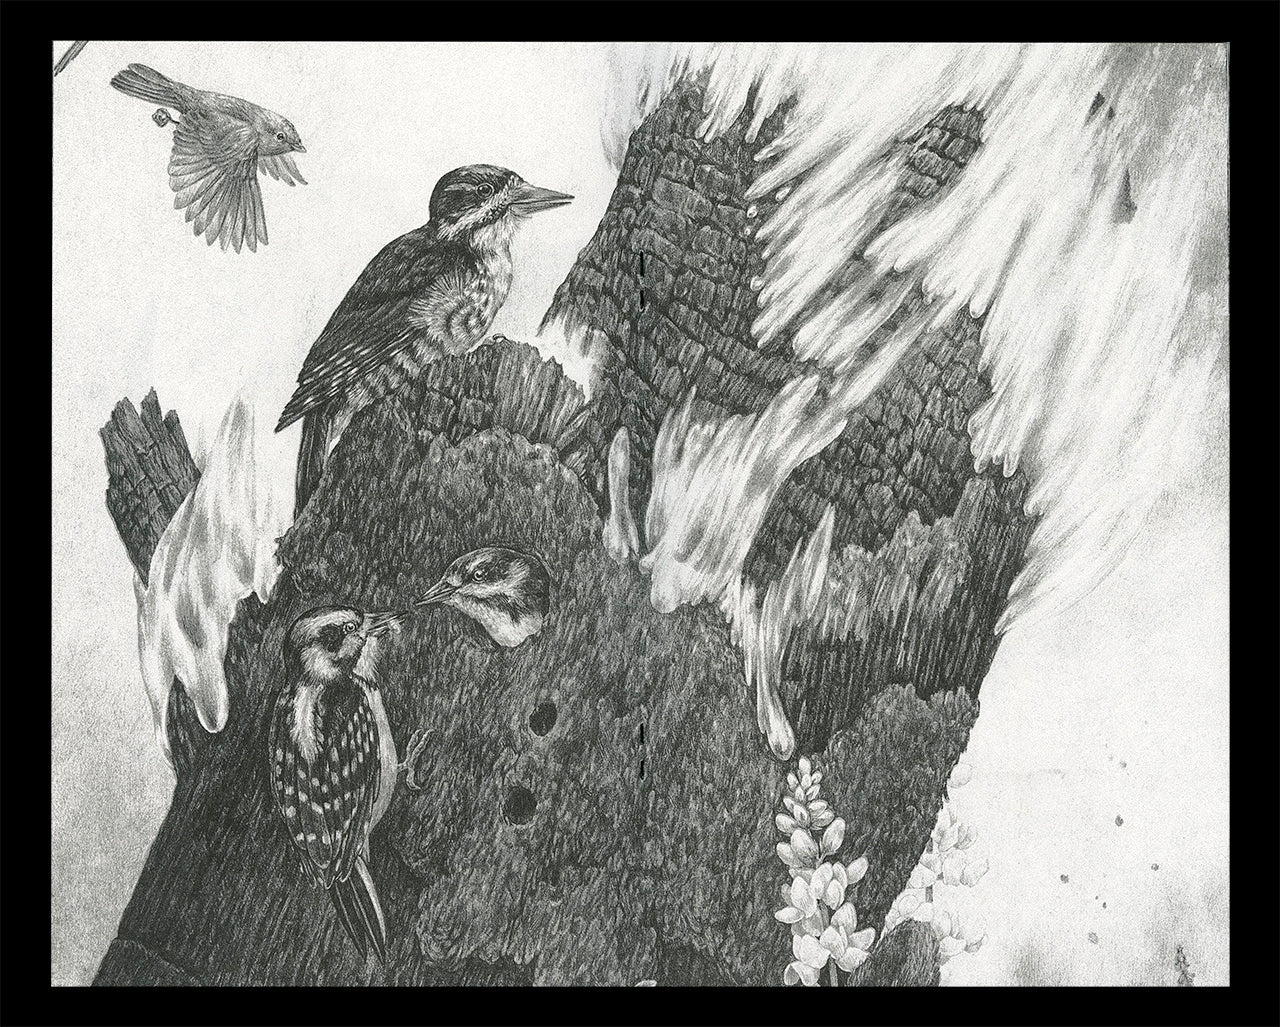 Interior spread of Zoe Keller's zine "Drawings" showing a graphite drawing of woodpeckers nesting in a tree